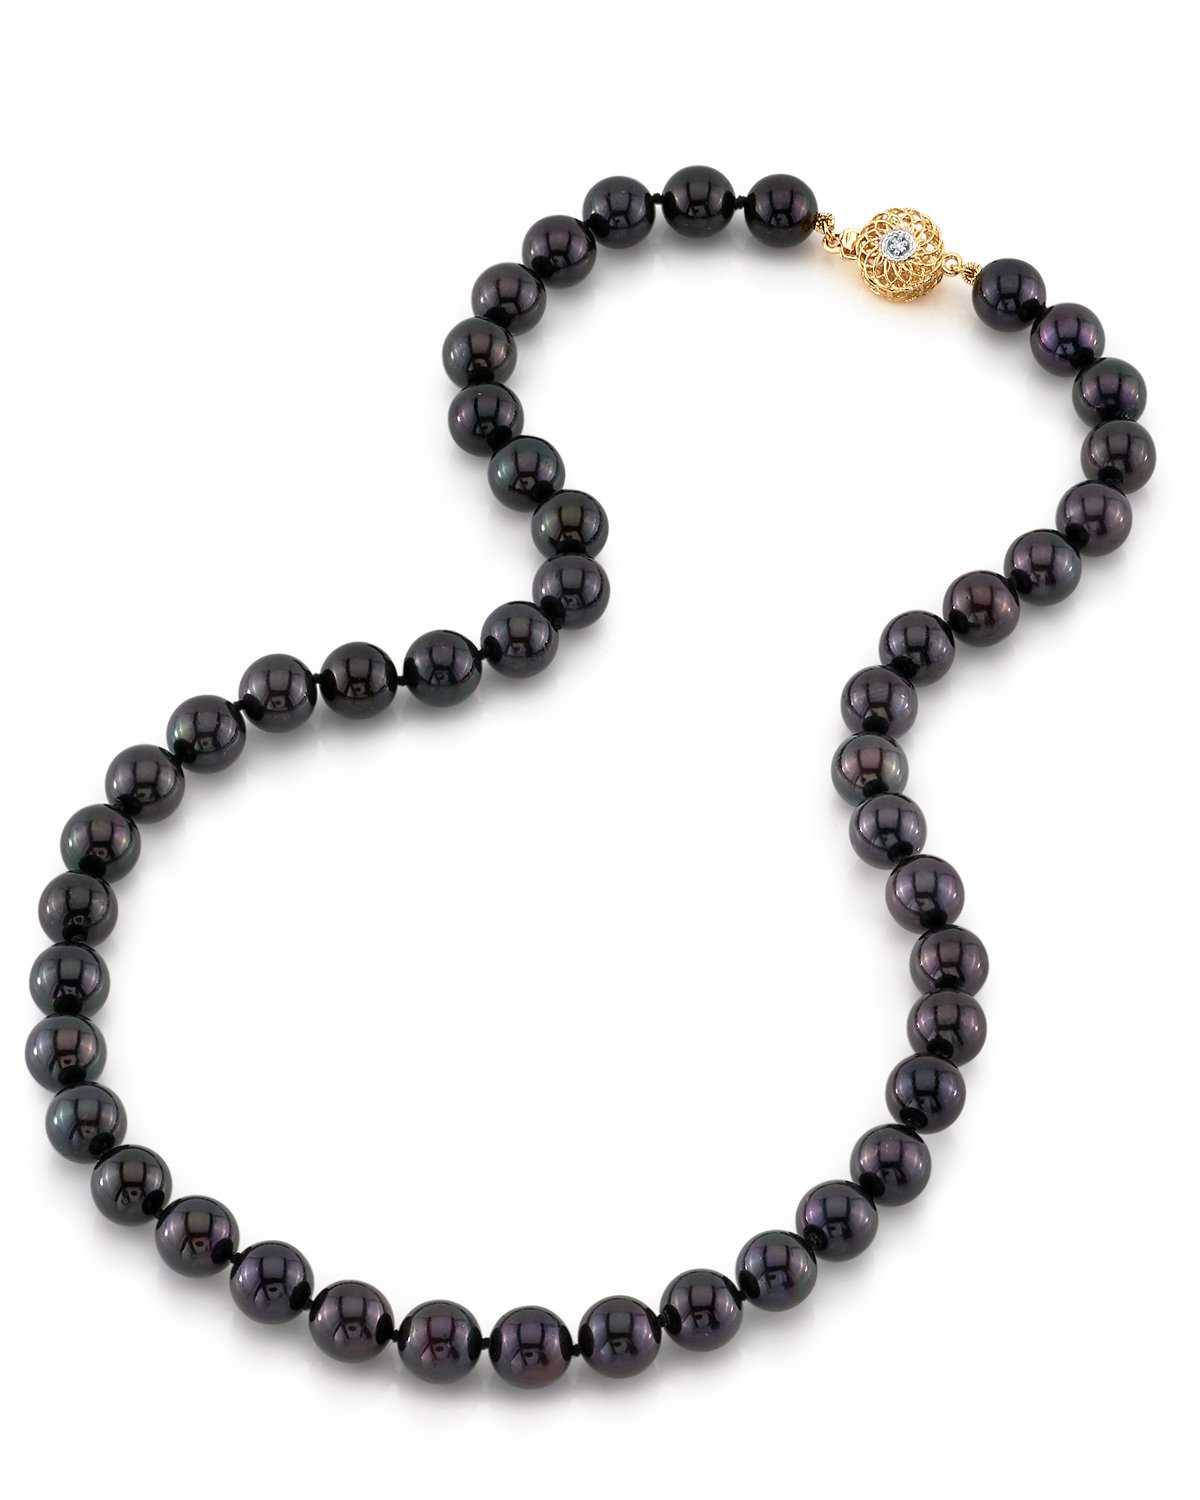 Black Japanese Akoya Pearl Necklace, 8.5-9.0mm - AAA Quality